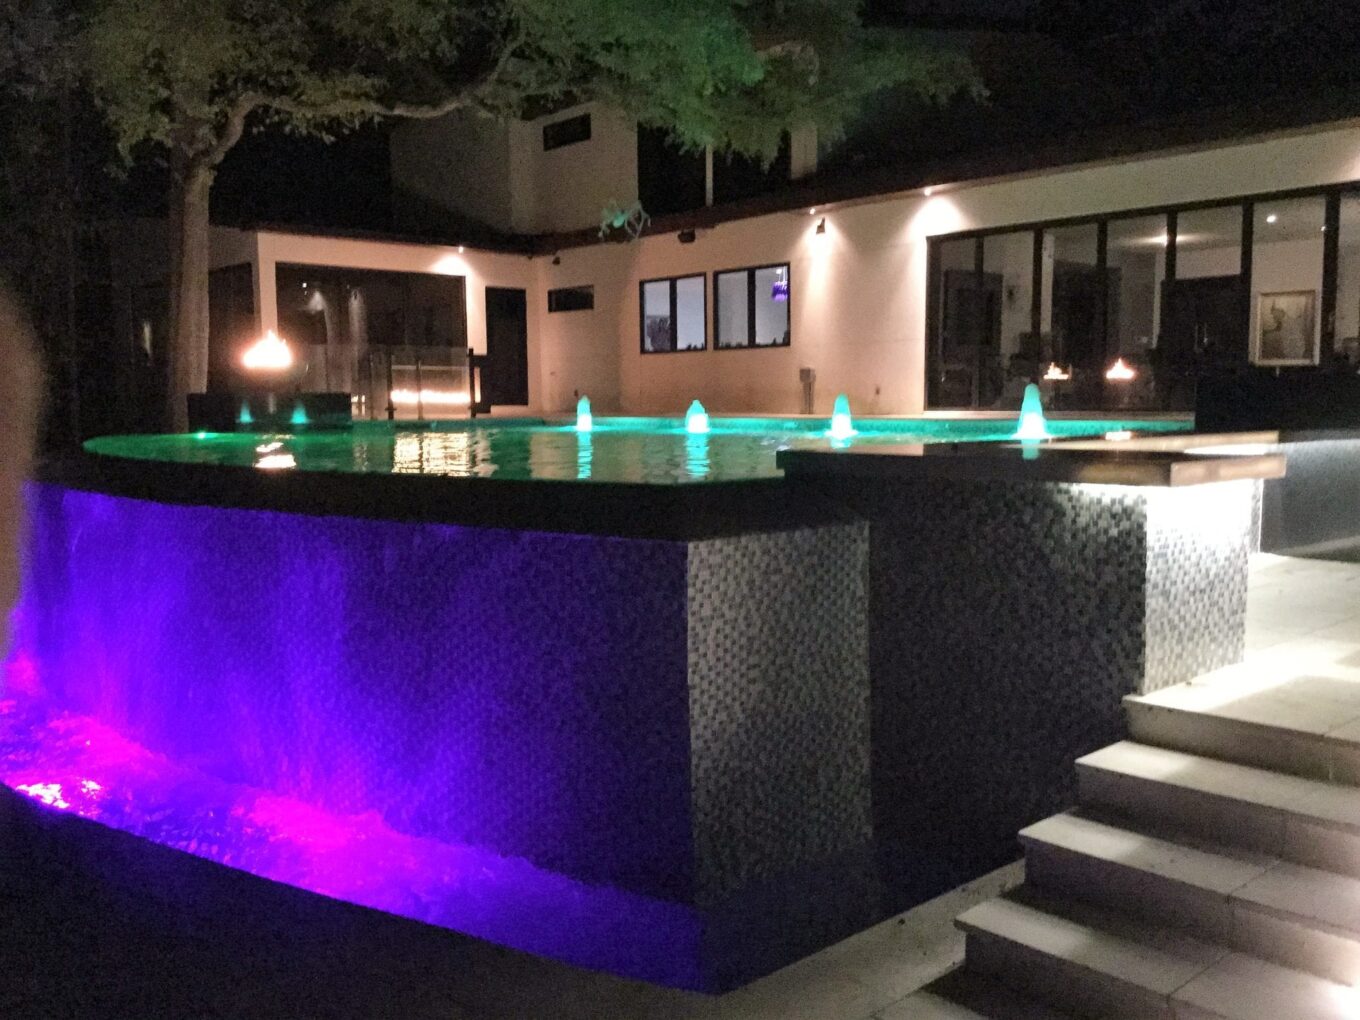 A pool with lights on the side of it